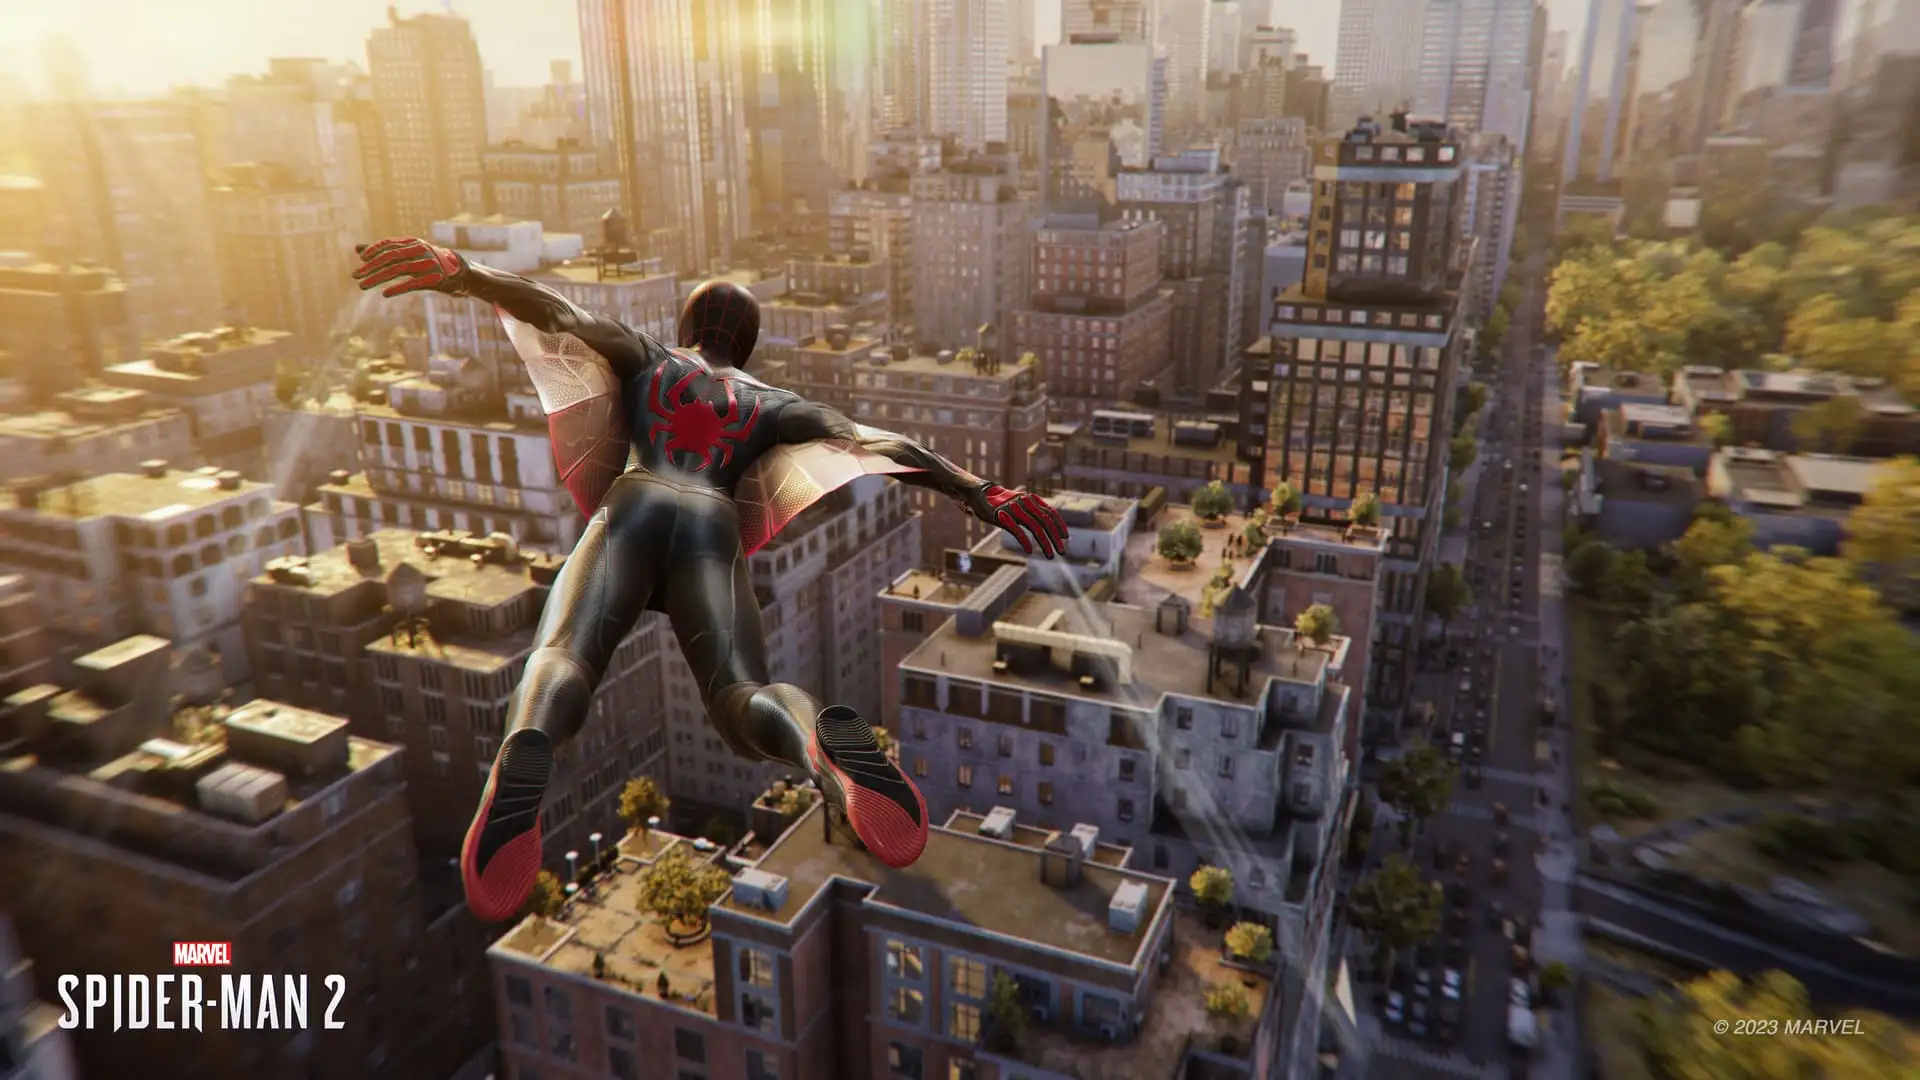 Marvel’s Spider-Man 2 Players Will Be Able to Ride Coney Island Amusements